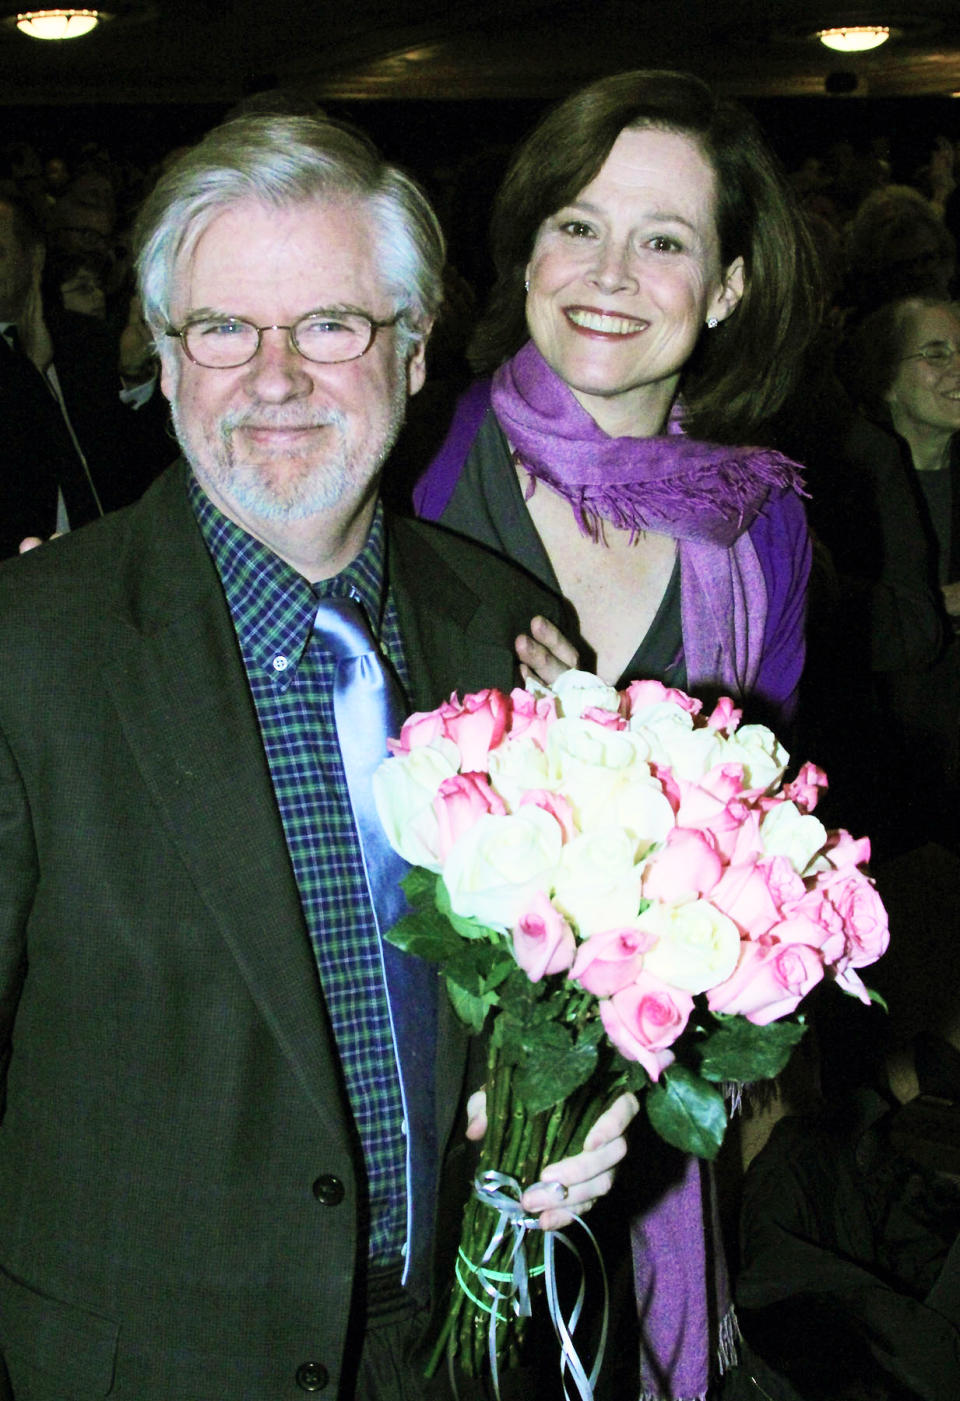 This publicity image released by The O + M Company shows playwright Christopher Durang, left, with actress Sigourney Weaver at curtain call on opening night of "Vanya and Sonia and Masha and Spike". (AP Photo/The O + M Company, Bruce Glikas)